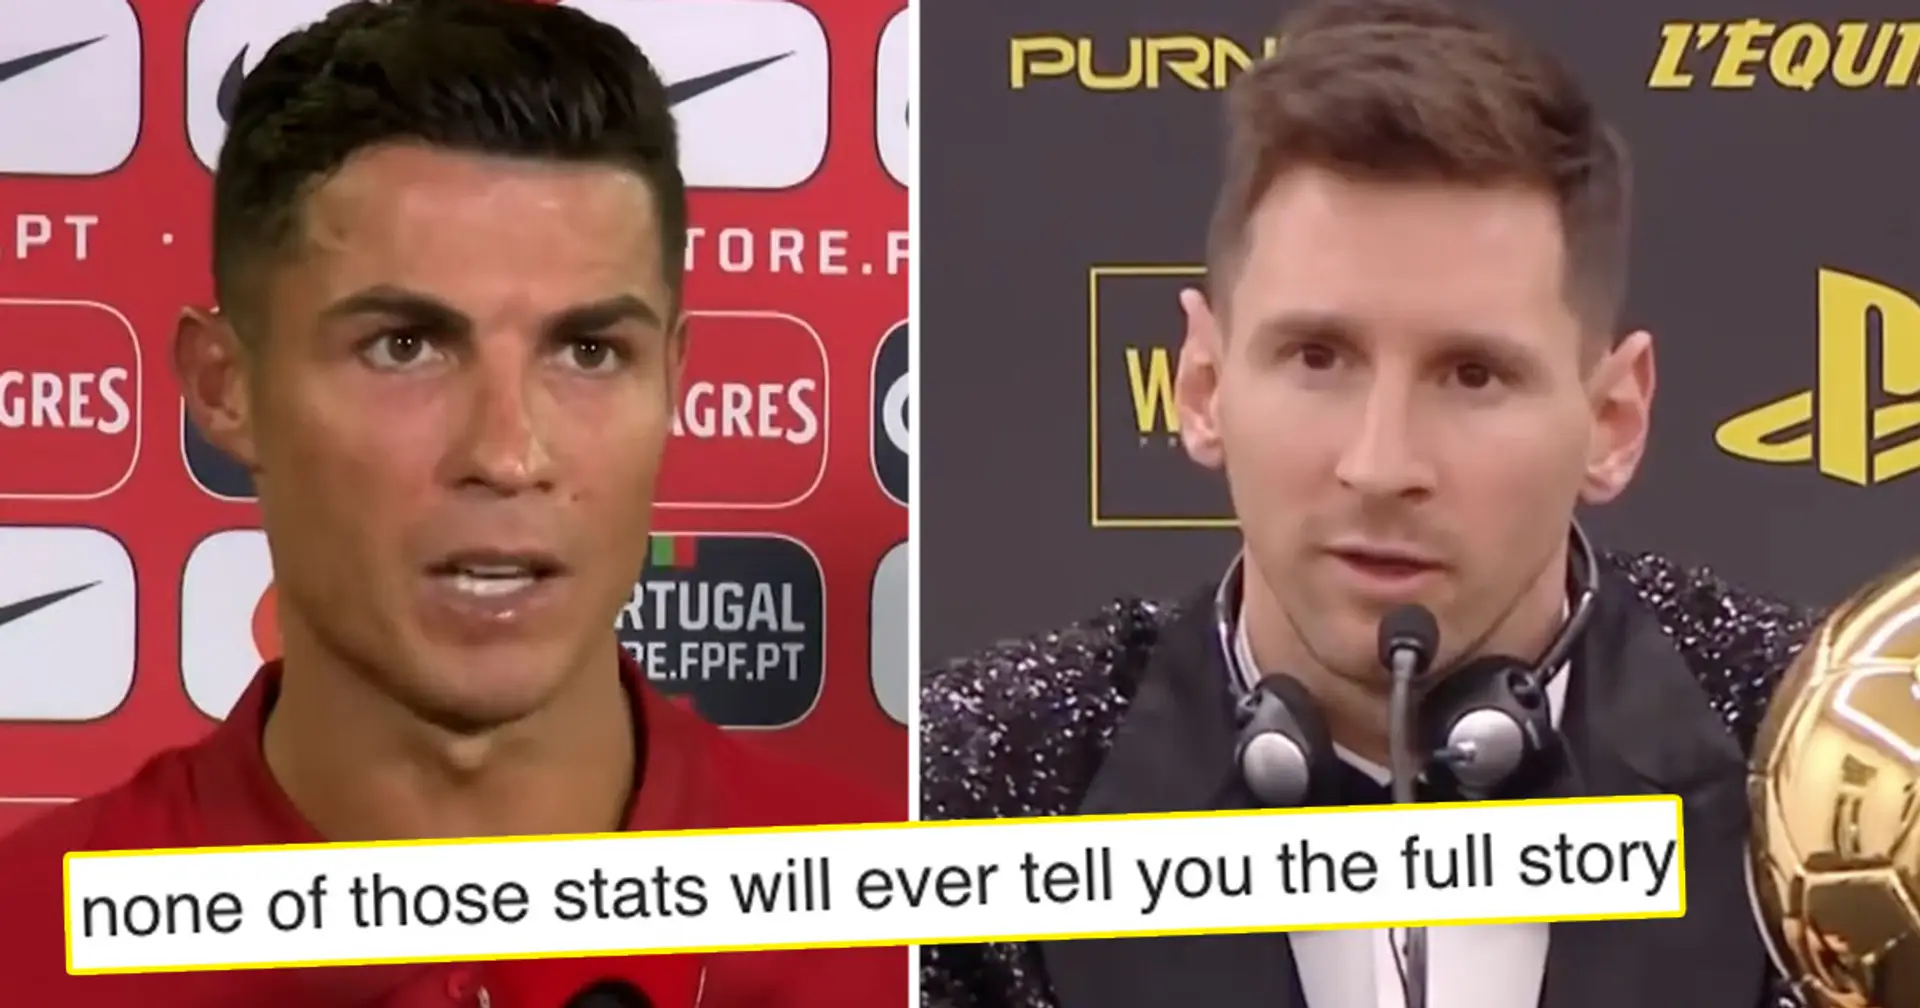 'That's the difference': One big reason why players like CR7 and Lewandowski still too far from Messi's levels